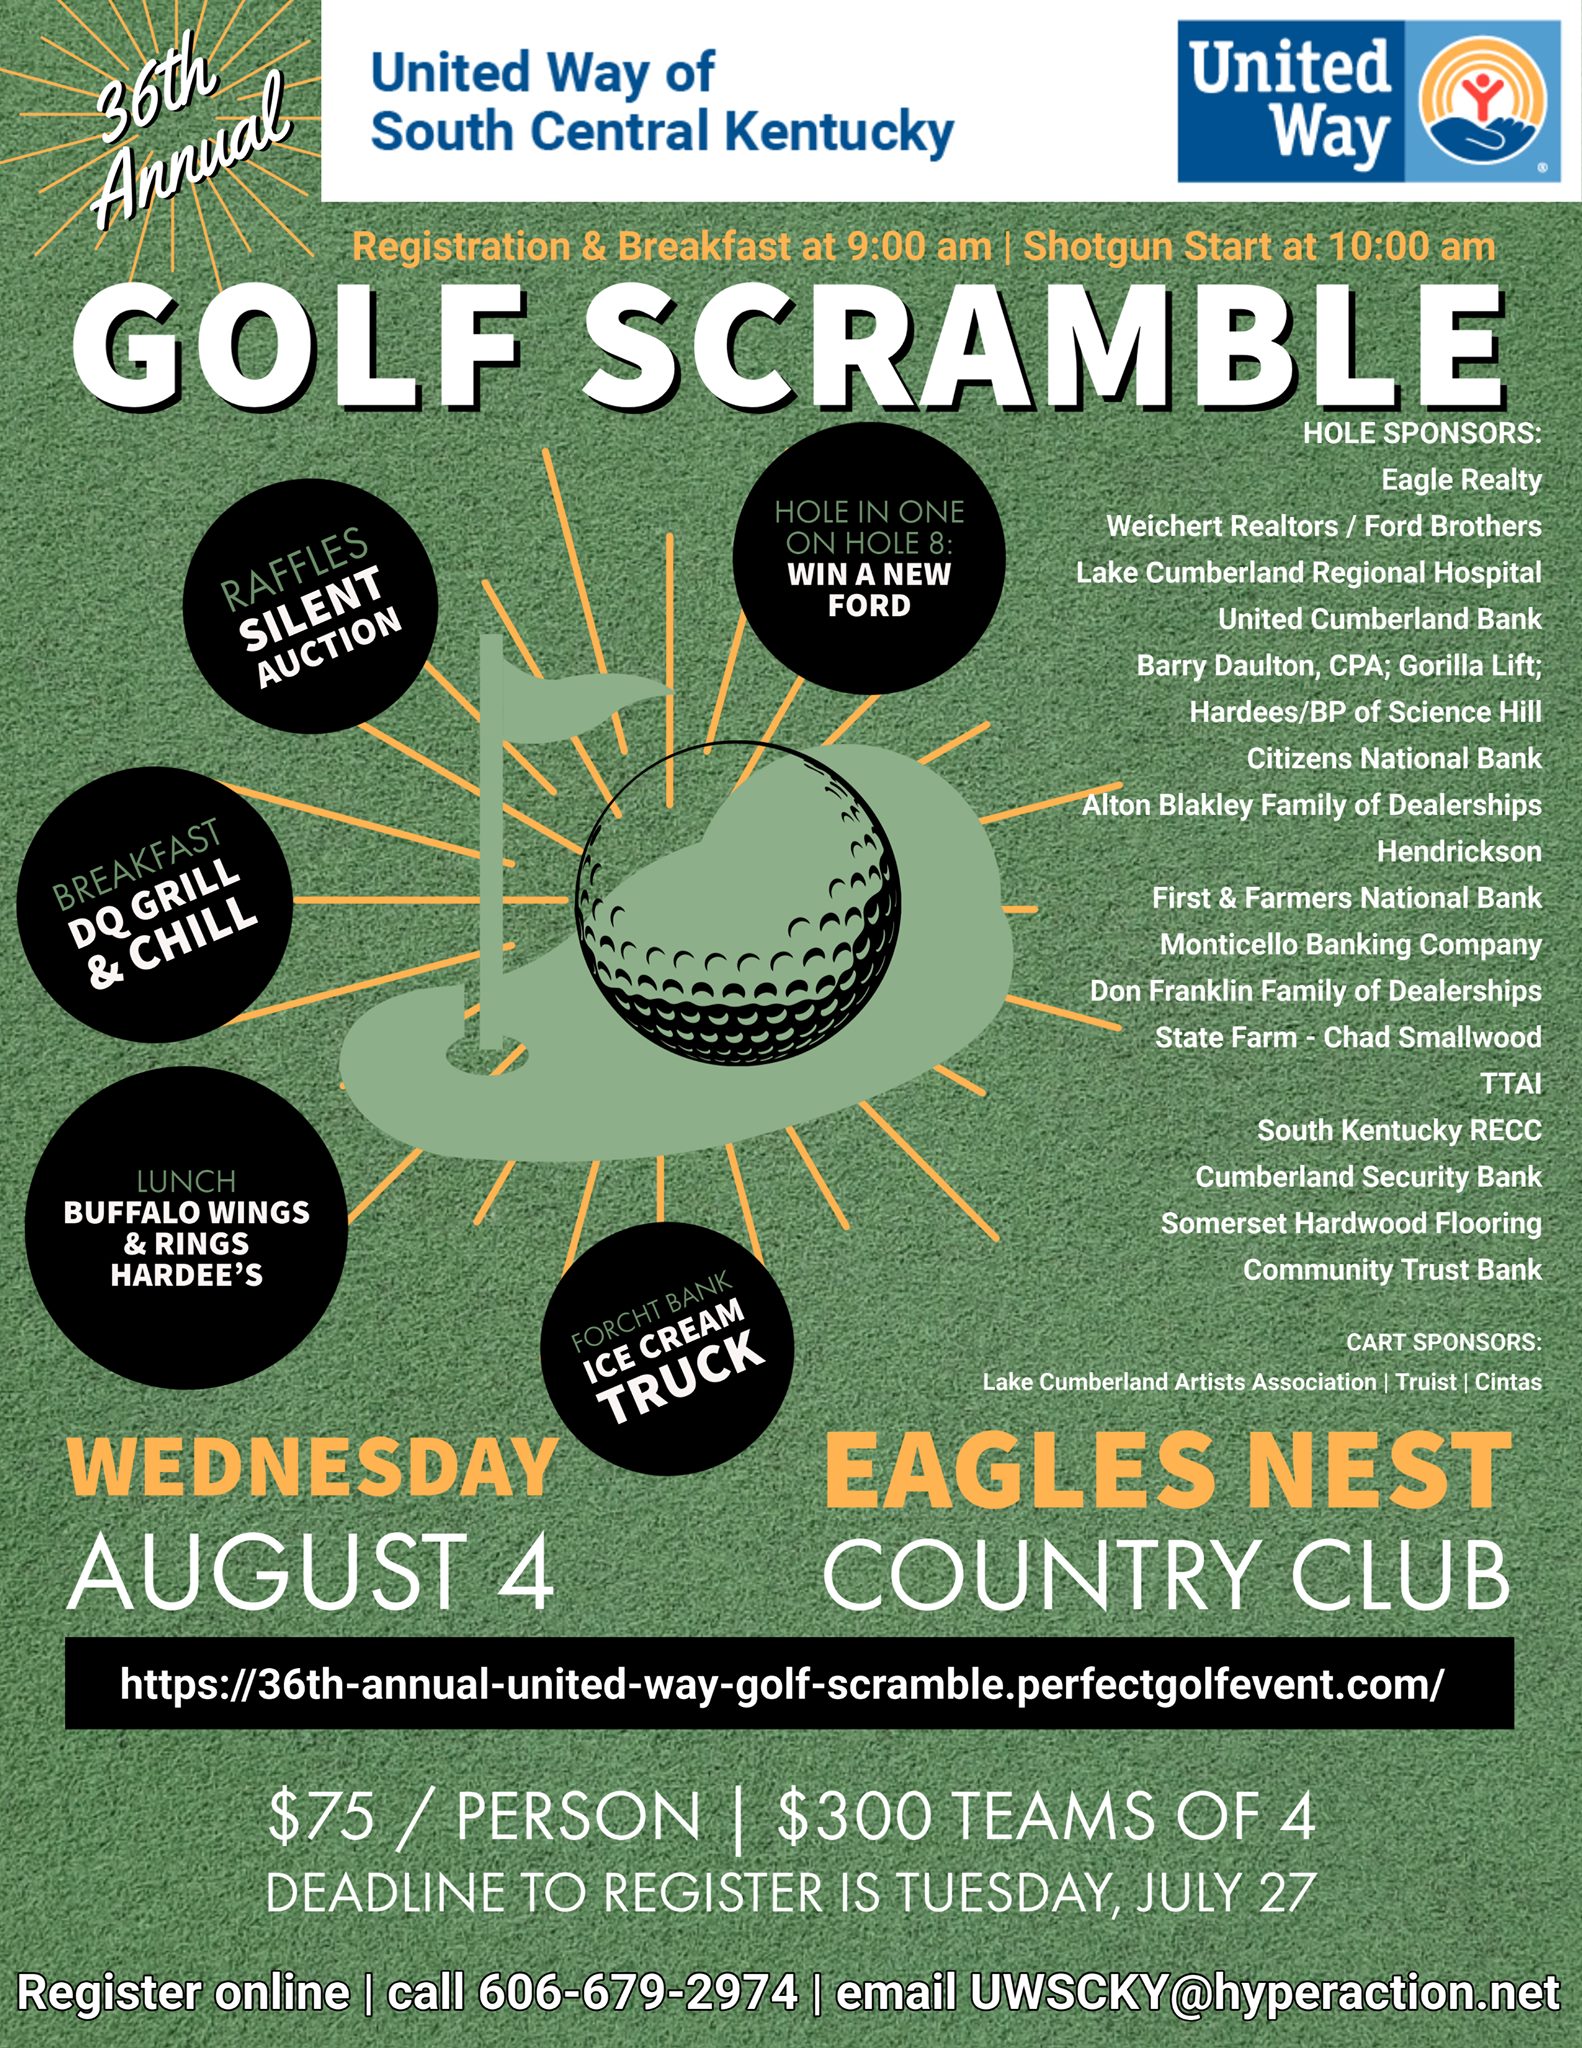 What Is A Scramble In Golf